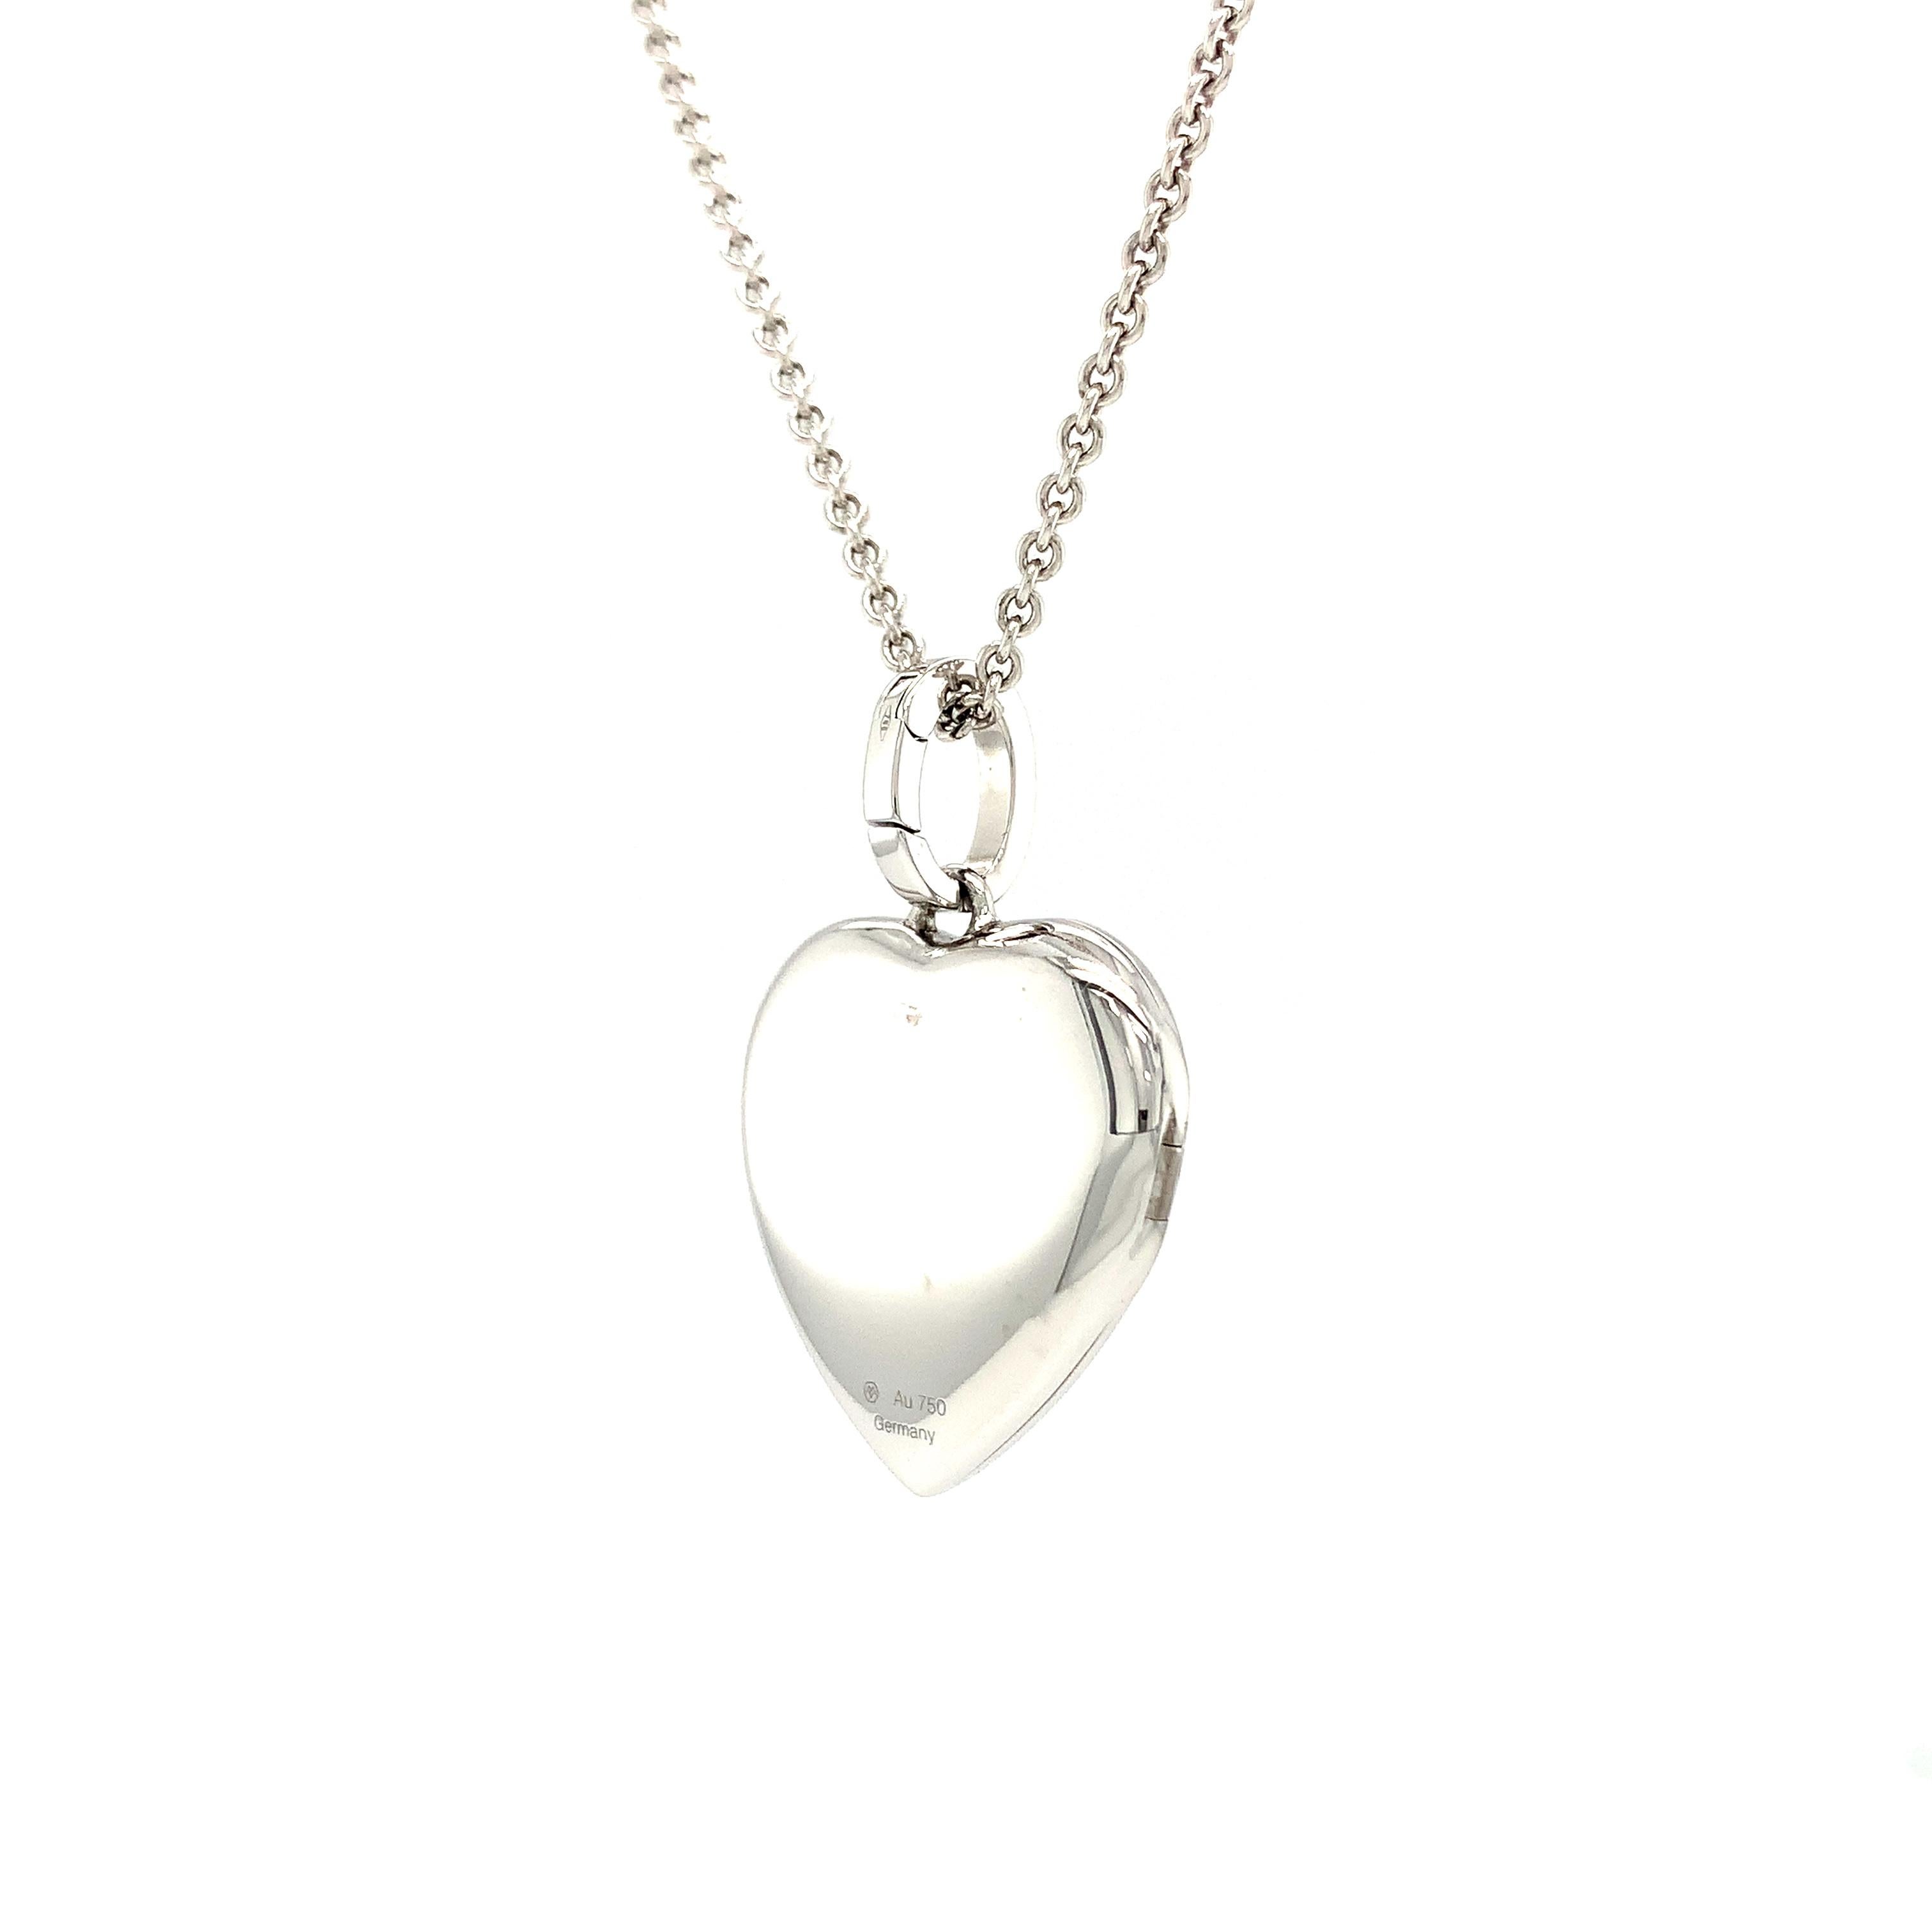 Heart Shaped Locket Pendant Necklace - 18k Polished White Gold - 23.0 x 25.0 mm In New Condition For Sale In Pforzheim, DE